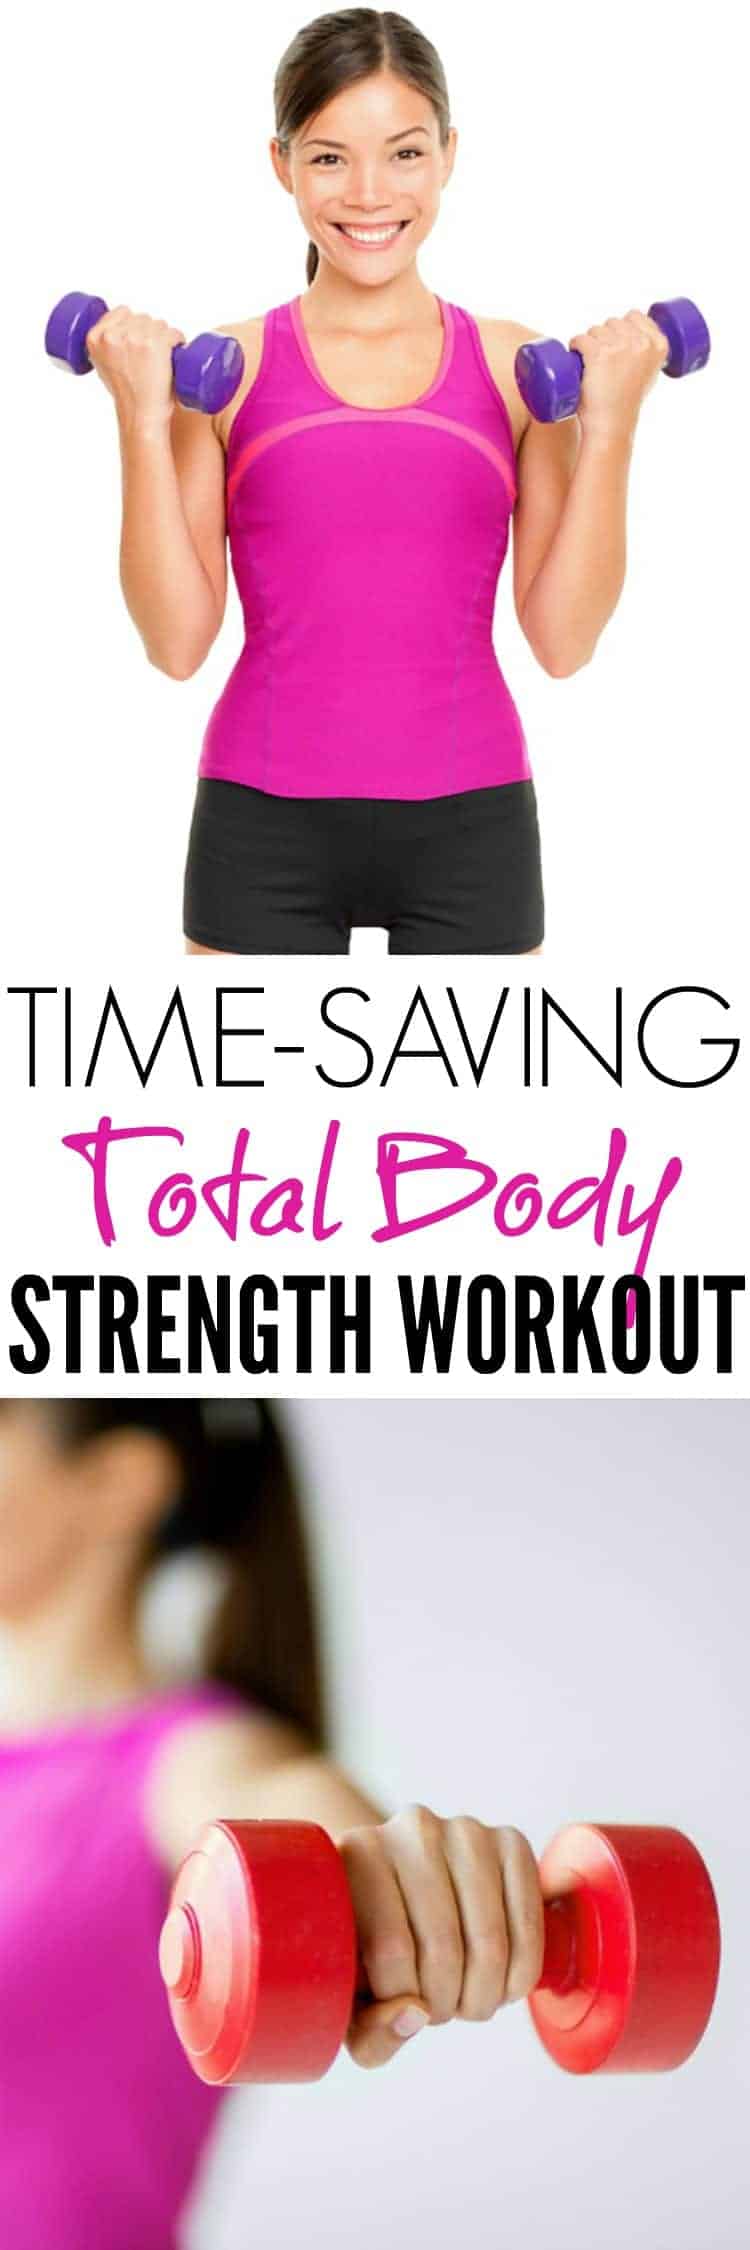 This Time-Saving Total Body Strength Workout is an efficient exercise routine for those days that you can't make it to the gym!